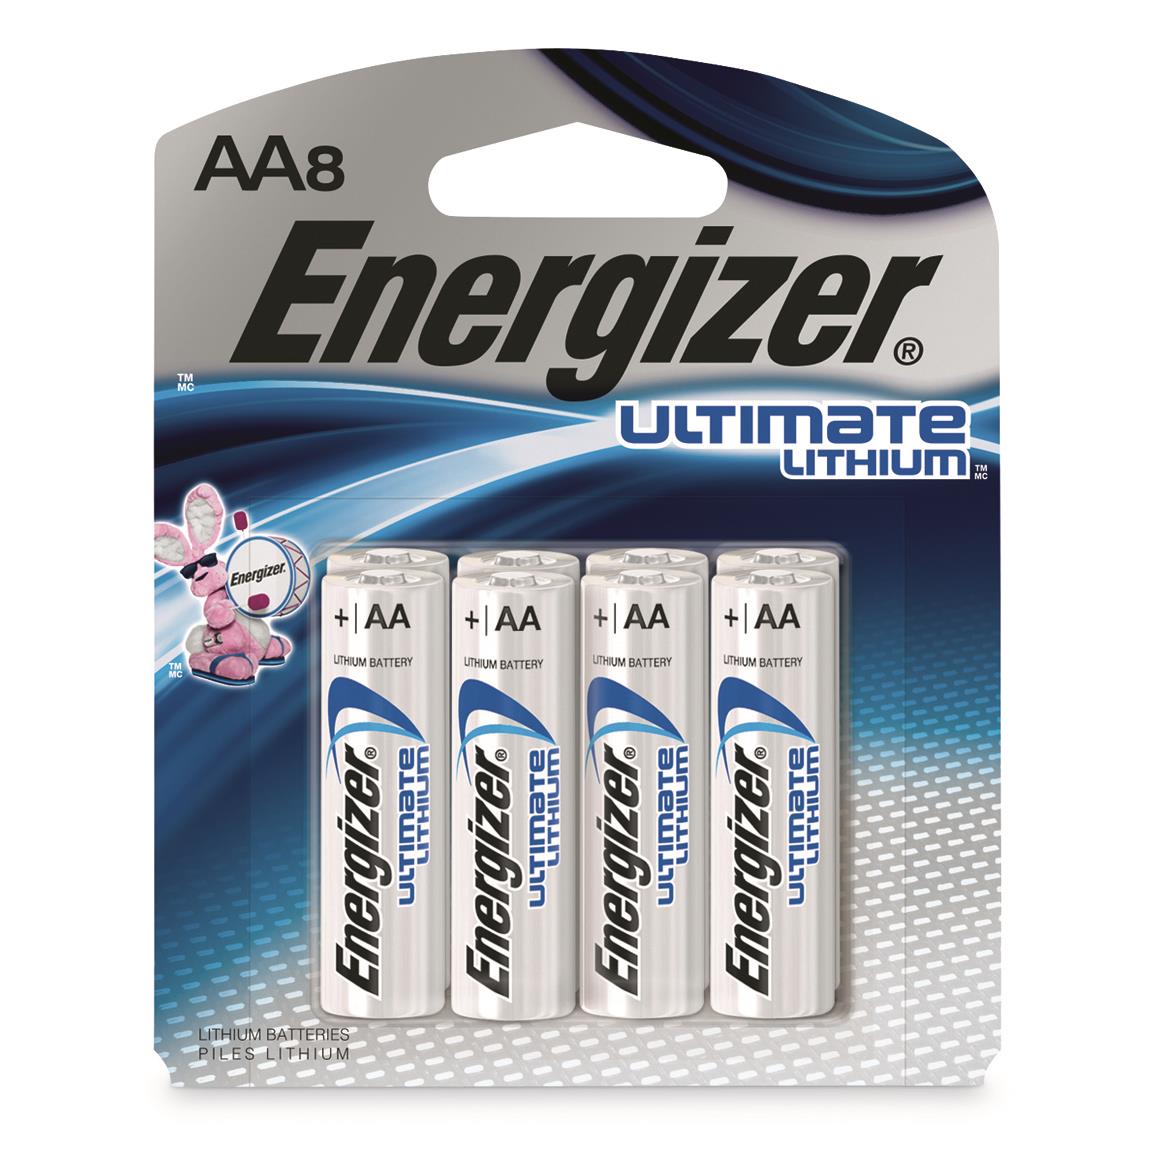 Energizer Ultimate Lithium™ AA Batteries, 8 Pack